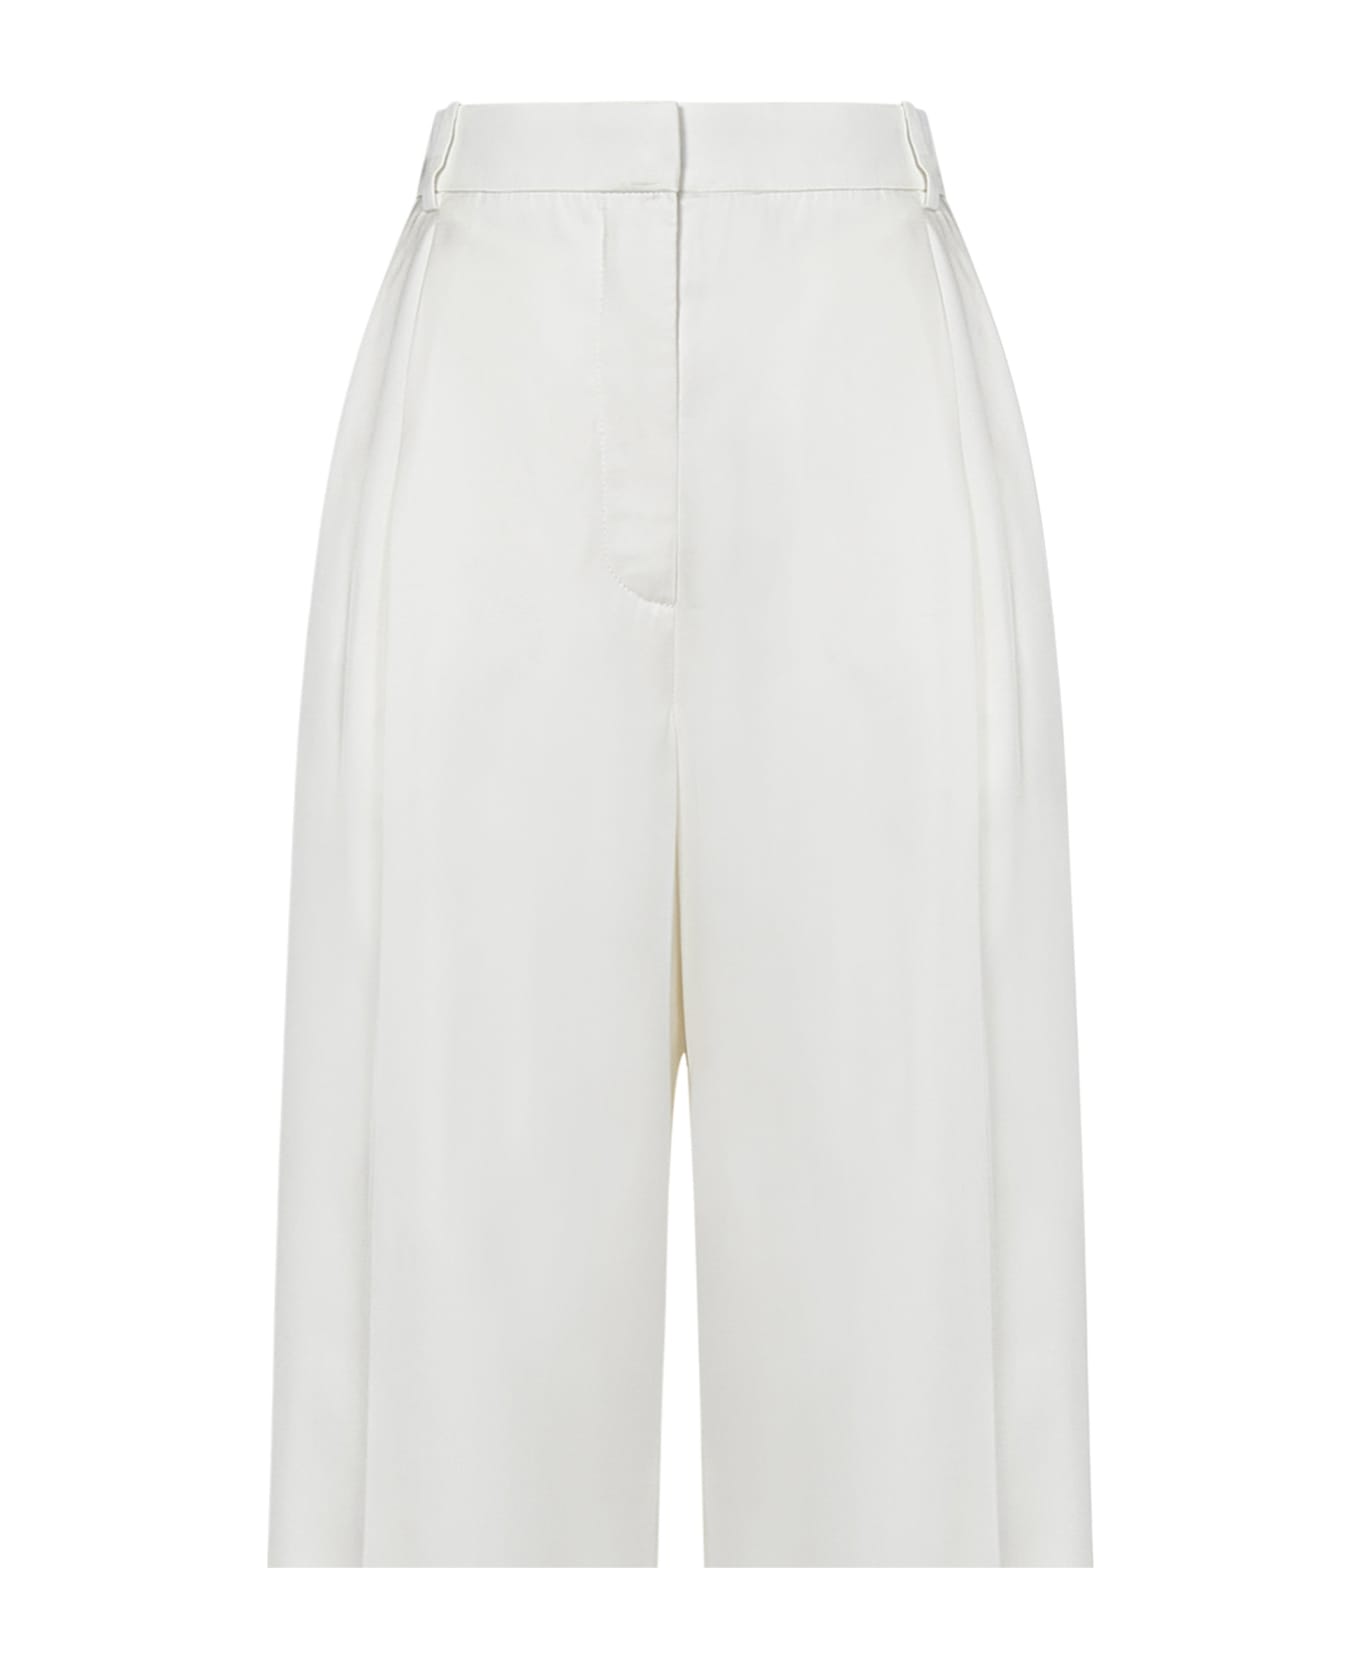 Alexander McQueen Trousers - White ボトムス